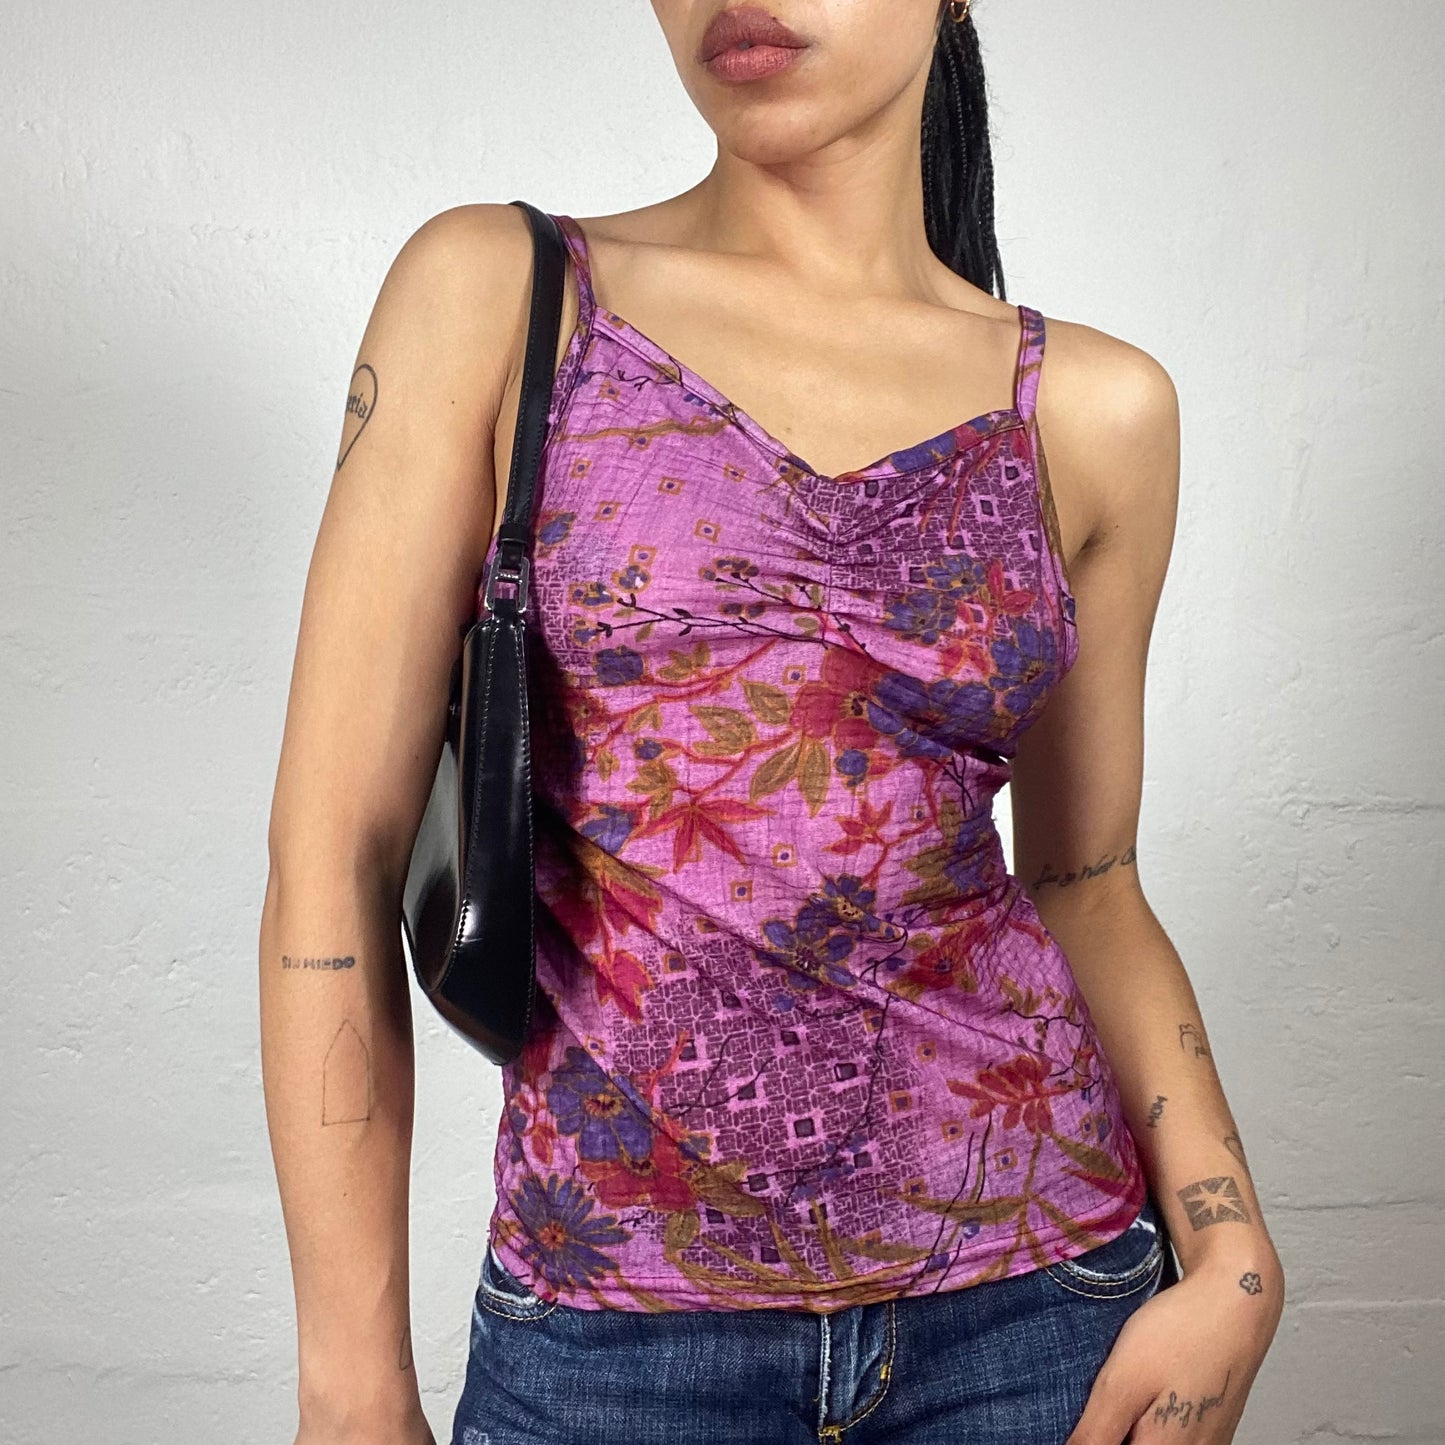 Vintage 2000's Pop Boho Fuchsia Abstract Printed Cami Top with Ruffled Bra (M/L)